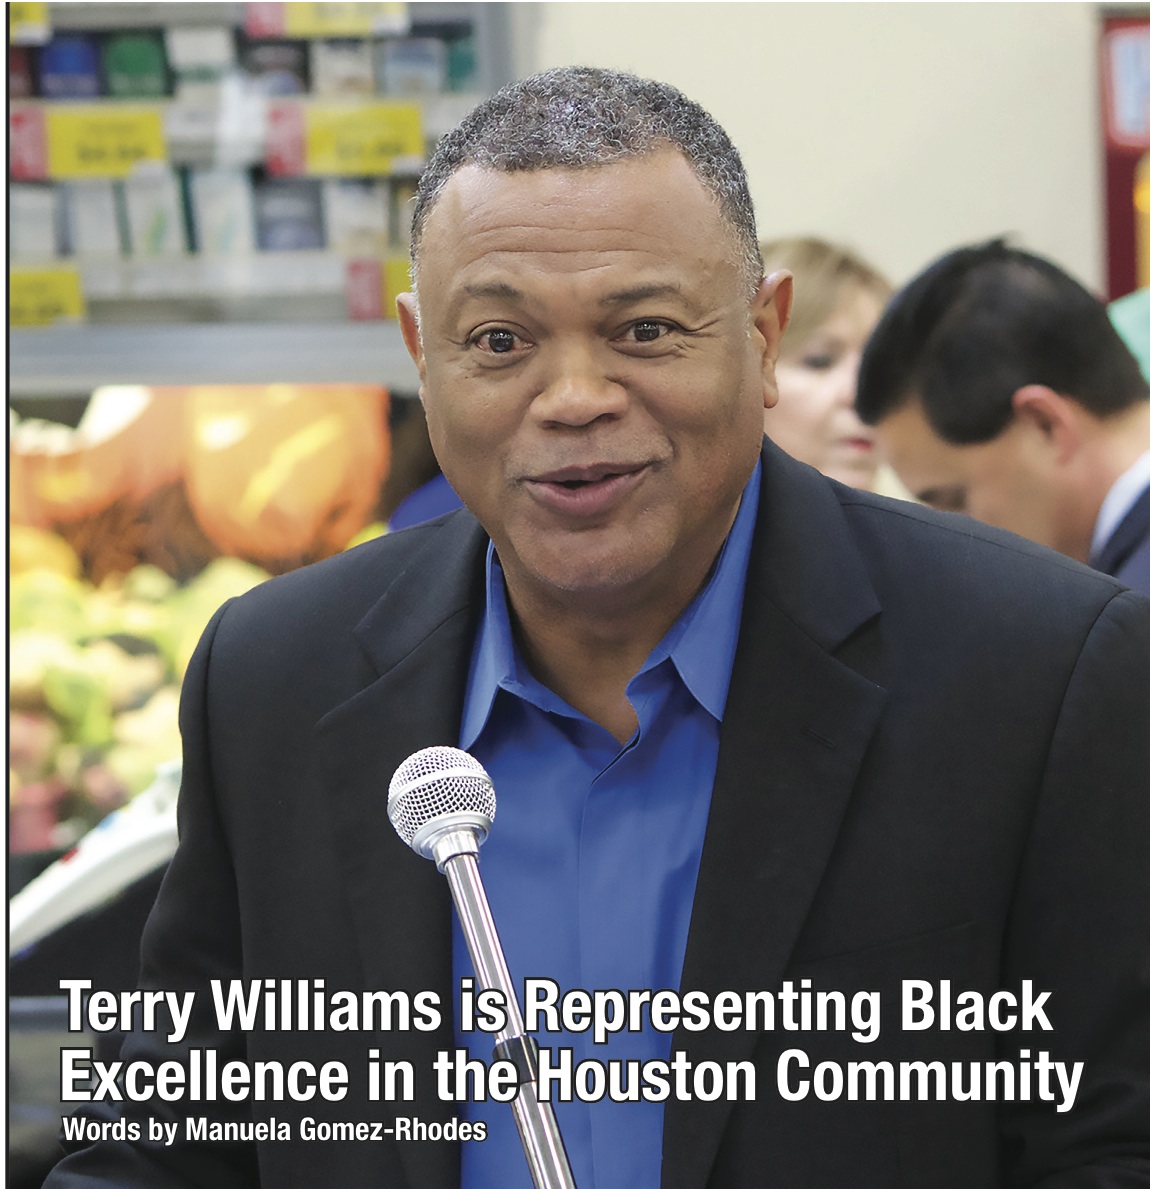 Terry Williams Is Representing Black Excellence in Houston Community